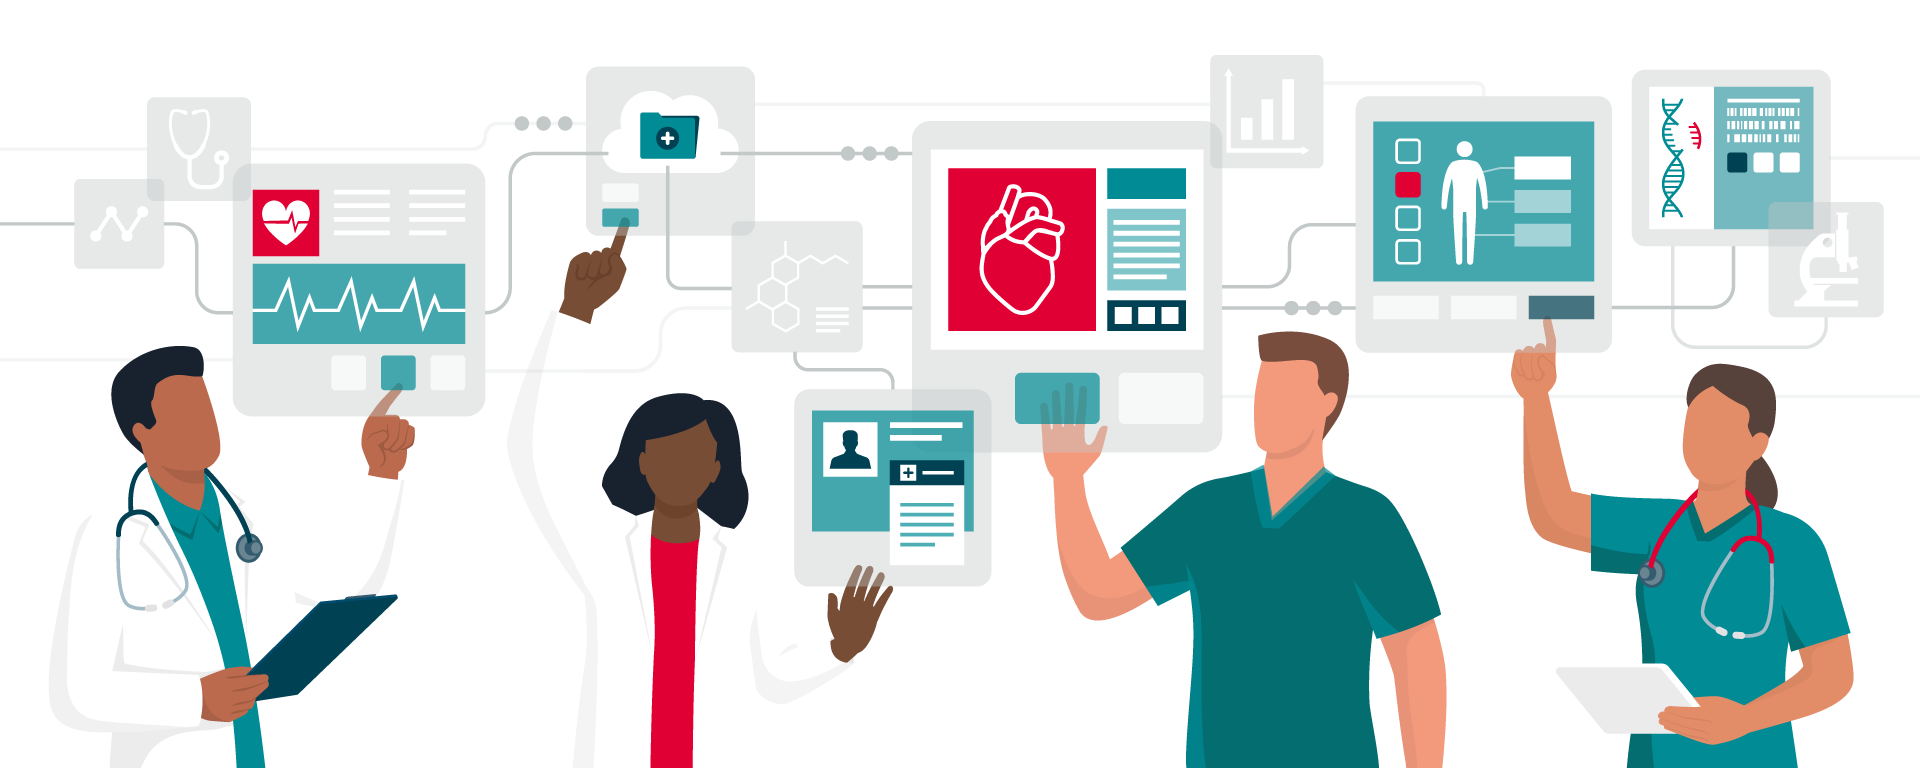 Doctors-interacting-with-digital-interfaces-Updated